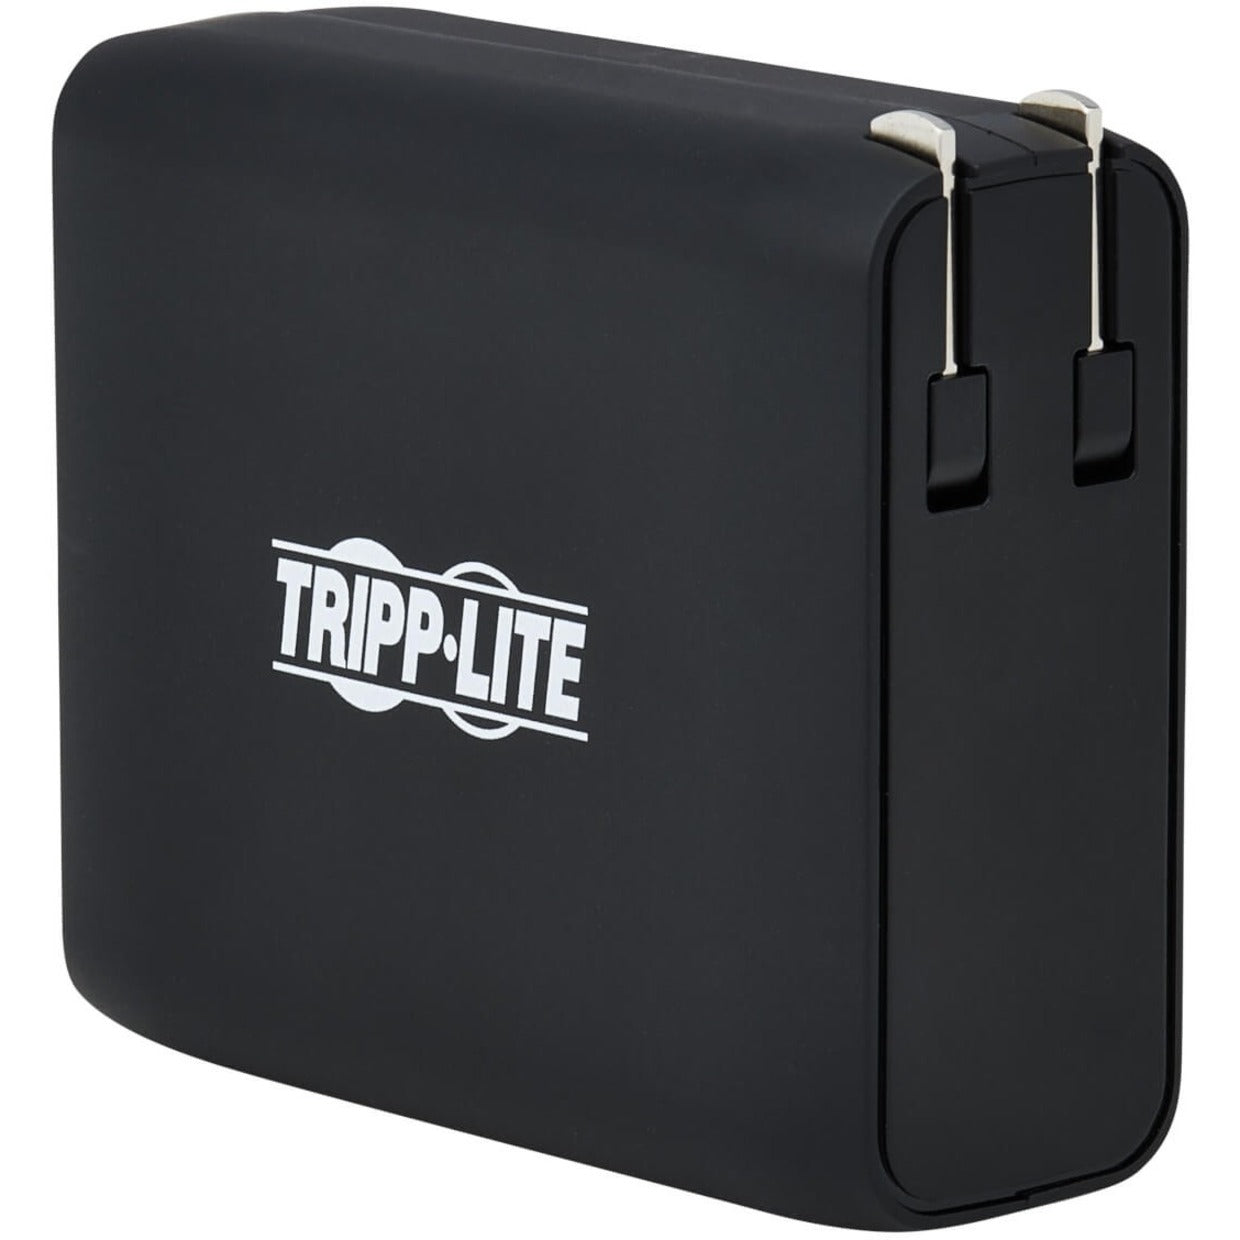 Tripp Lite UPBW-05K0-1A1C 5000mAh Power Bank, Dual USB Ports, Portable Charger for Android, iPhone, Tablet, and More